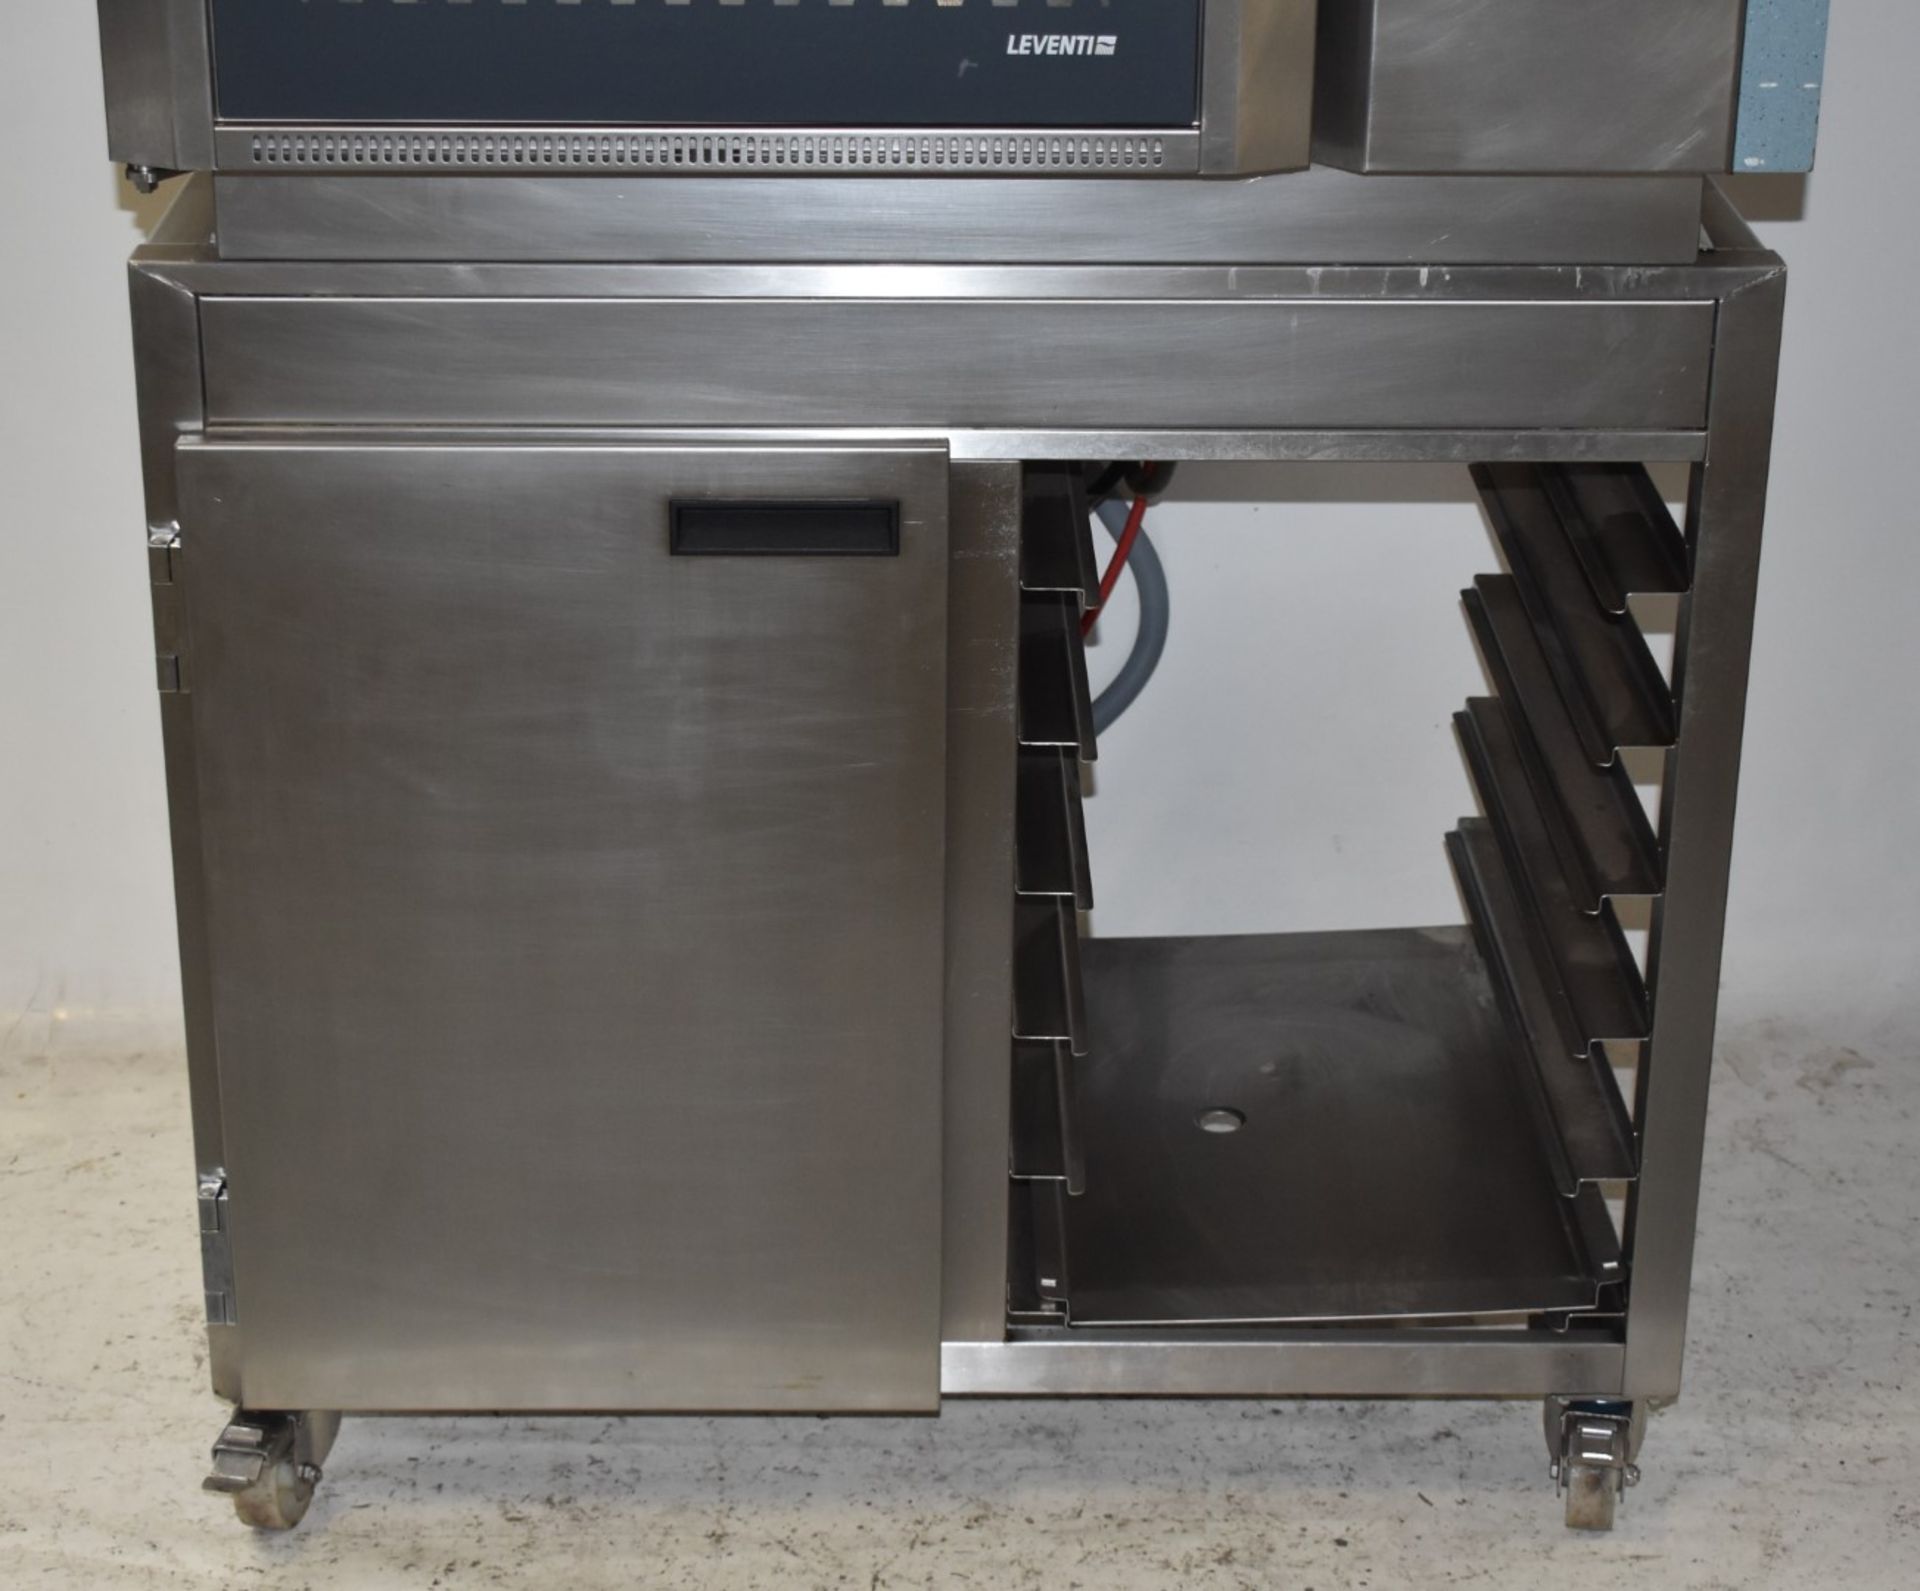 1 x Leventi Combimat Mastermind Steamer Oven - 6 Grid - 3 Phase - Includes Mobile Pedestal Base With - Image 4 of 14